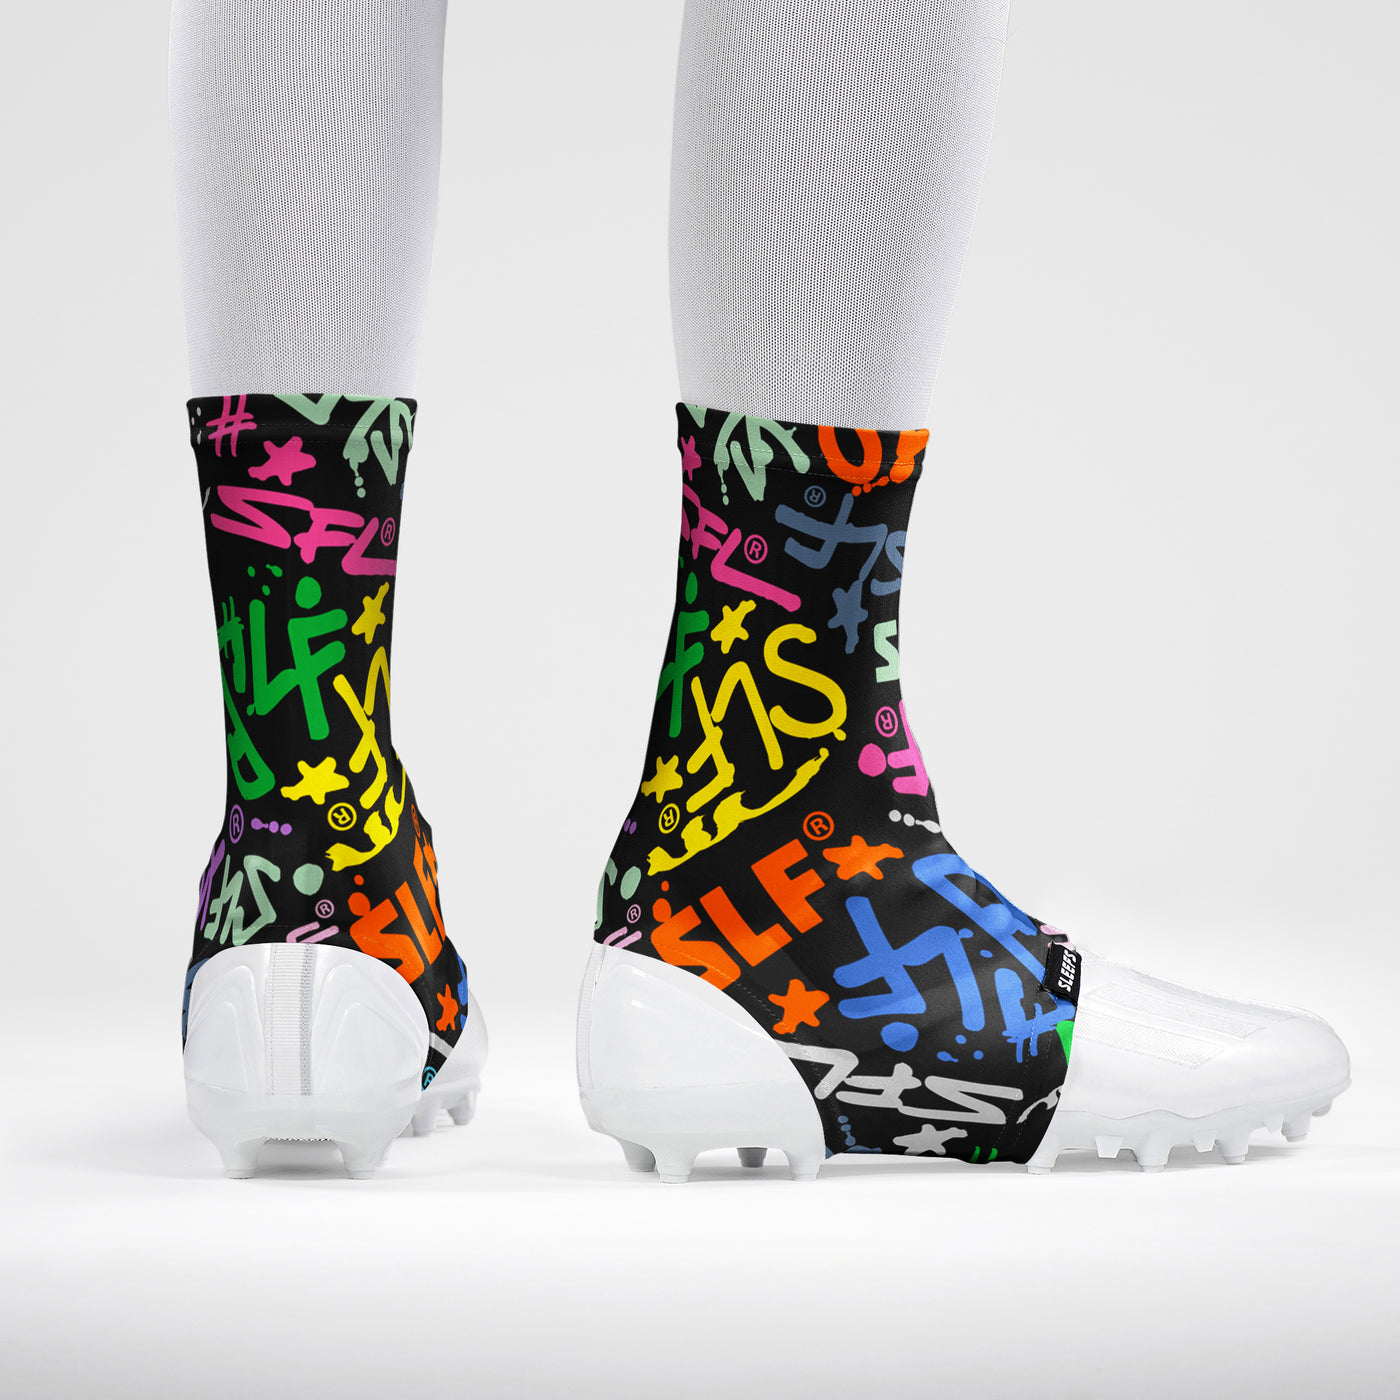 SLF Vivid Pattern Spats / Cleat Covers